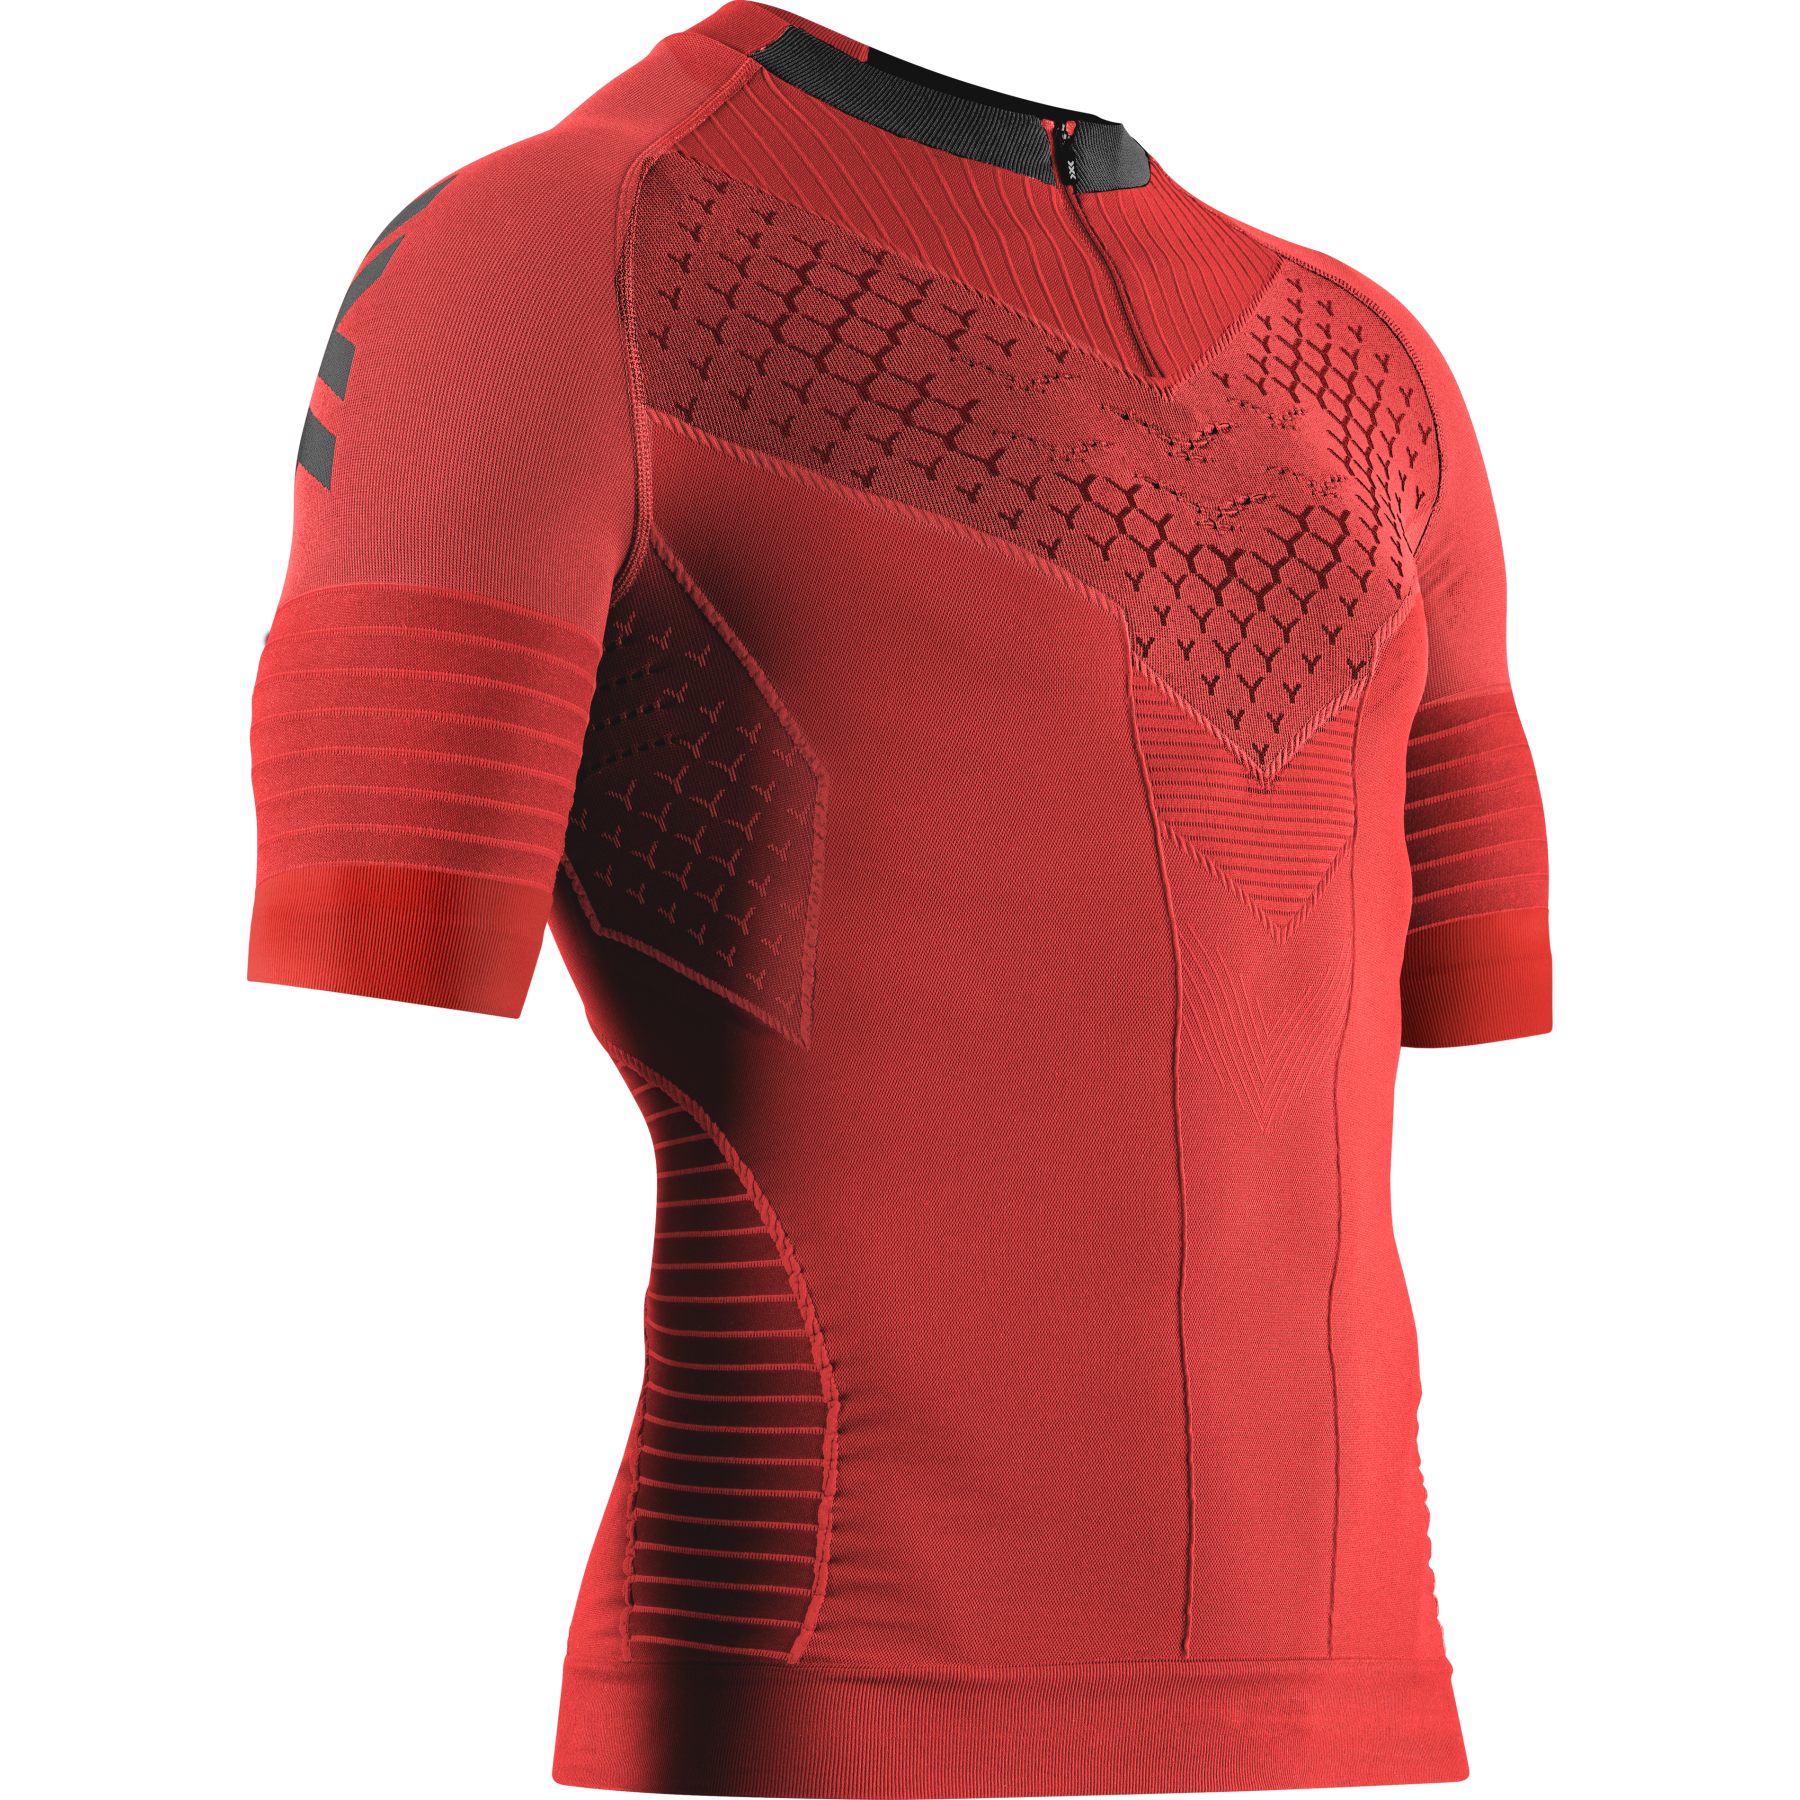 Picture of X-Bionic Twyce Race Short Sleeve Shirt Men - red/black